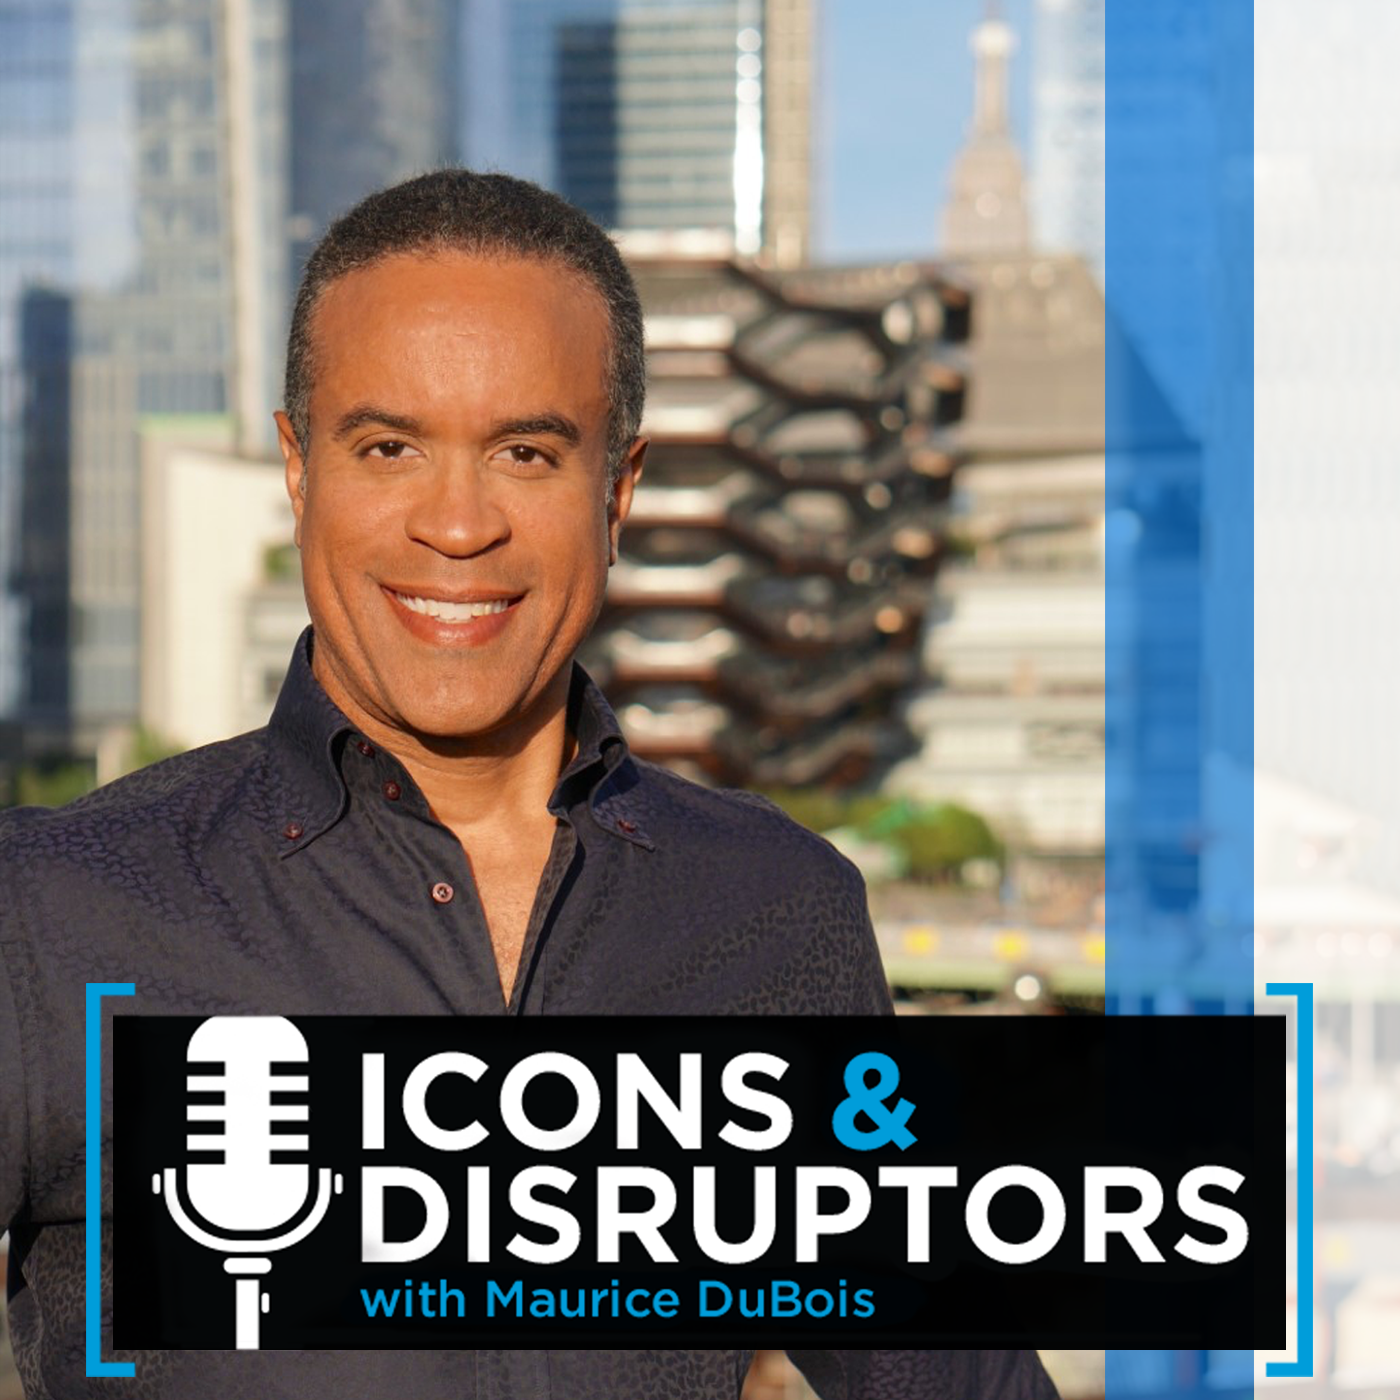 Icons & Disruptors with Maurice DuBois